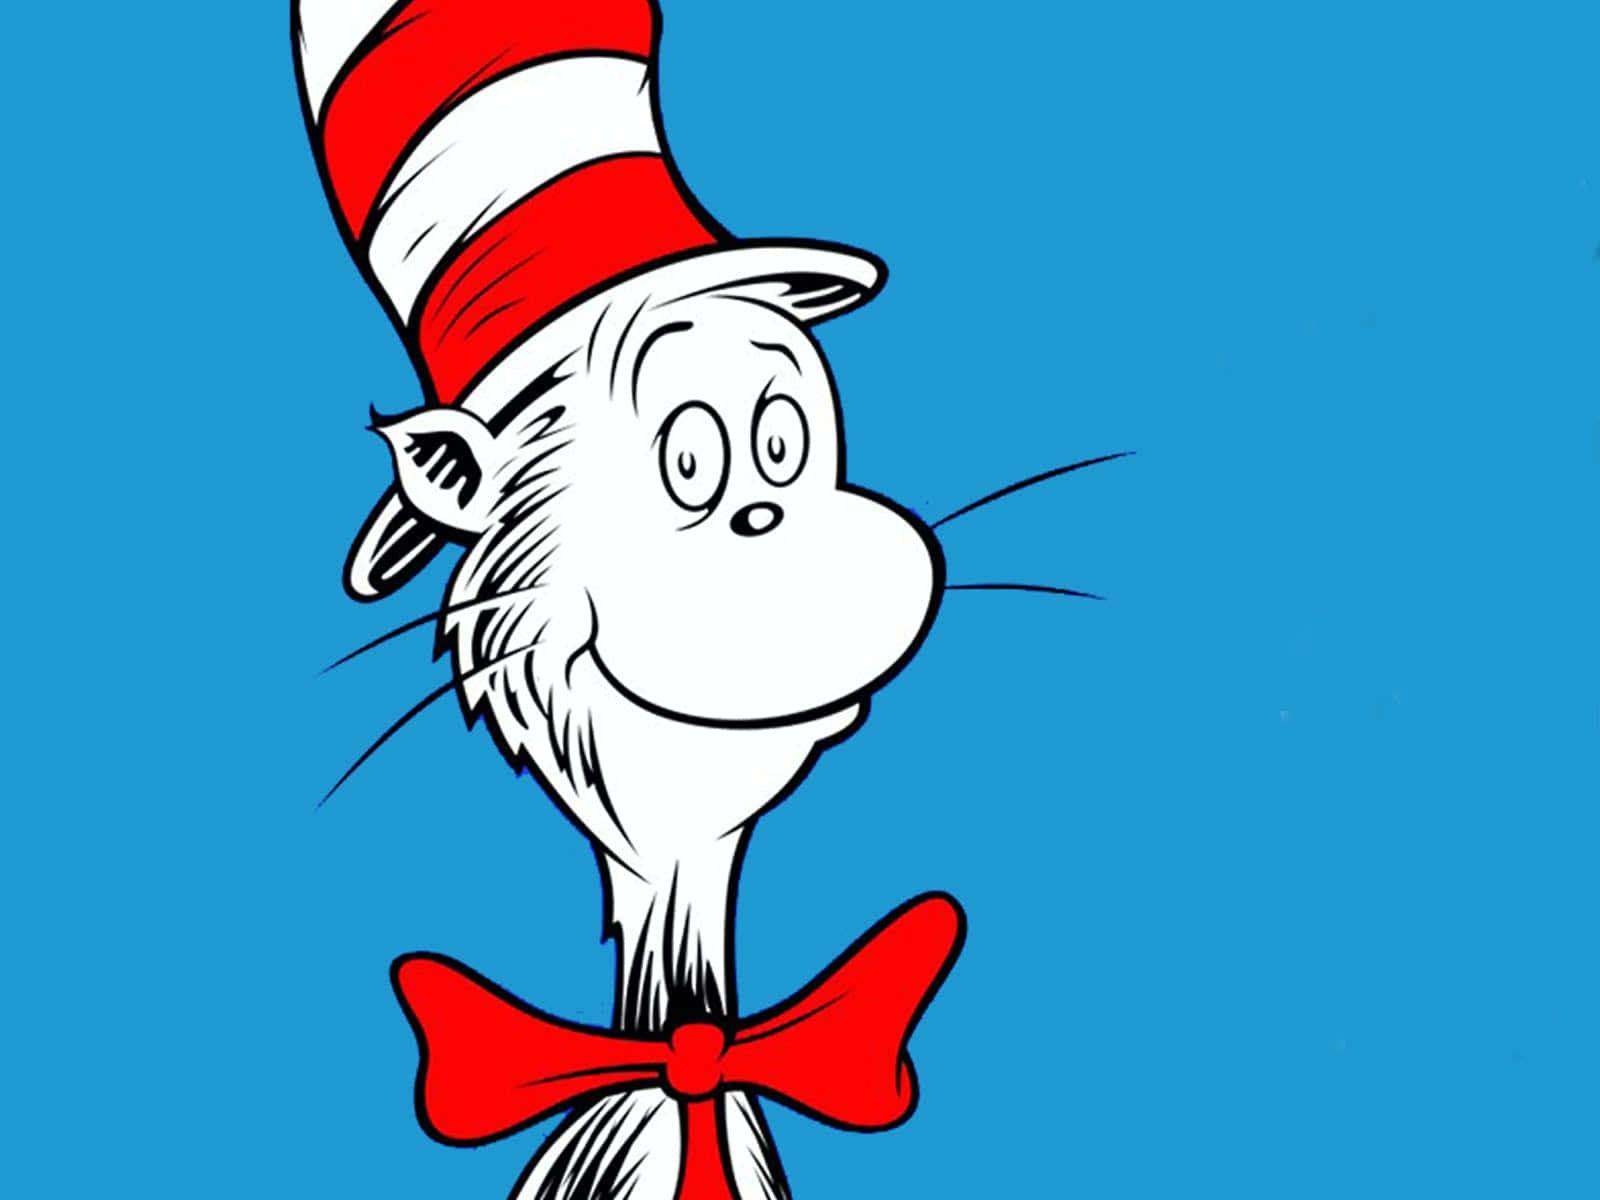 A Cat In The Hat Is Wearing A Red Bow Tie